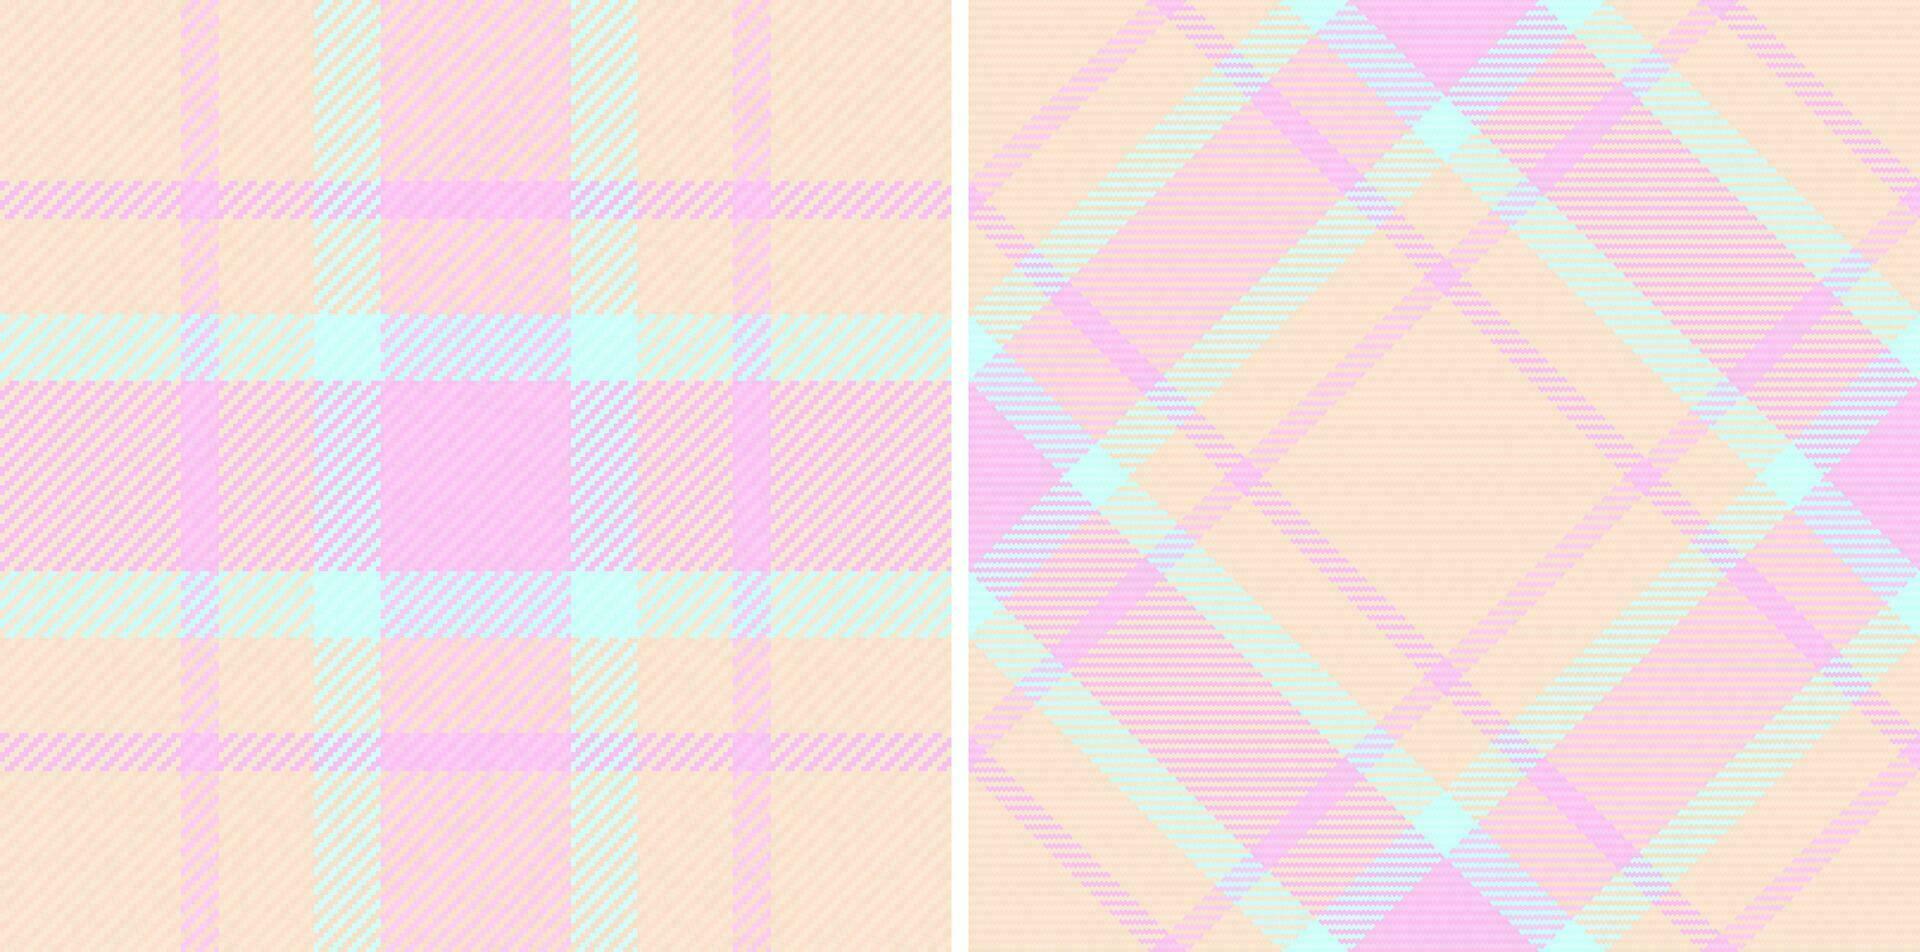 Textile check plaid of vector pattern seamless with a fabric background texture tartan.